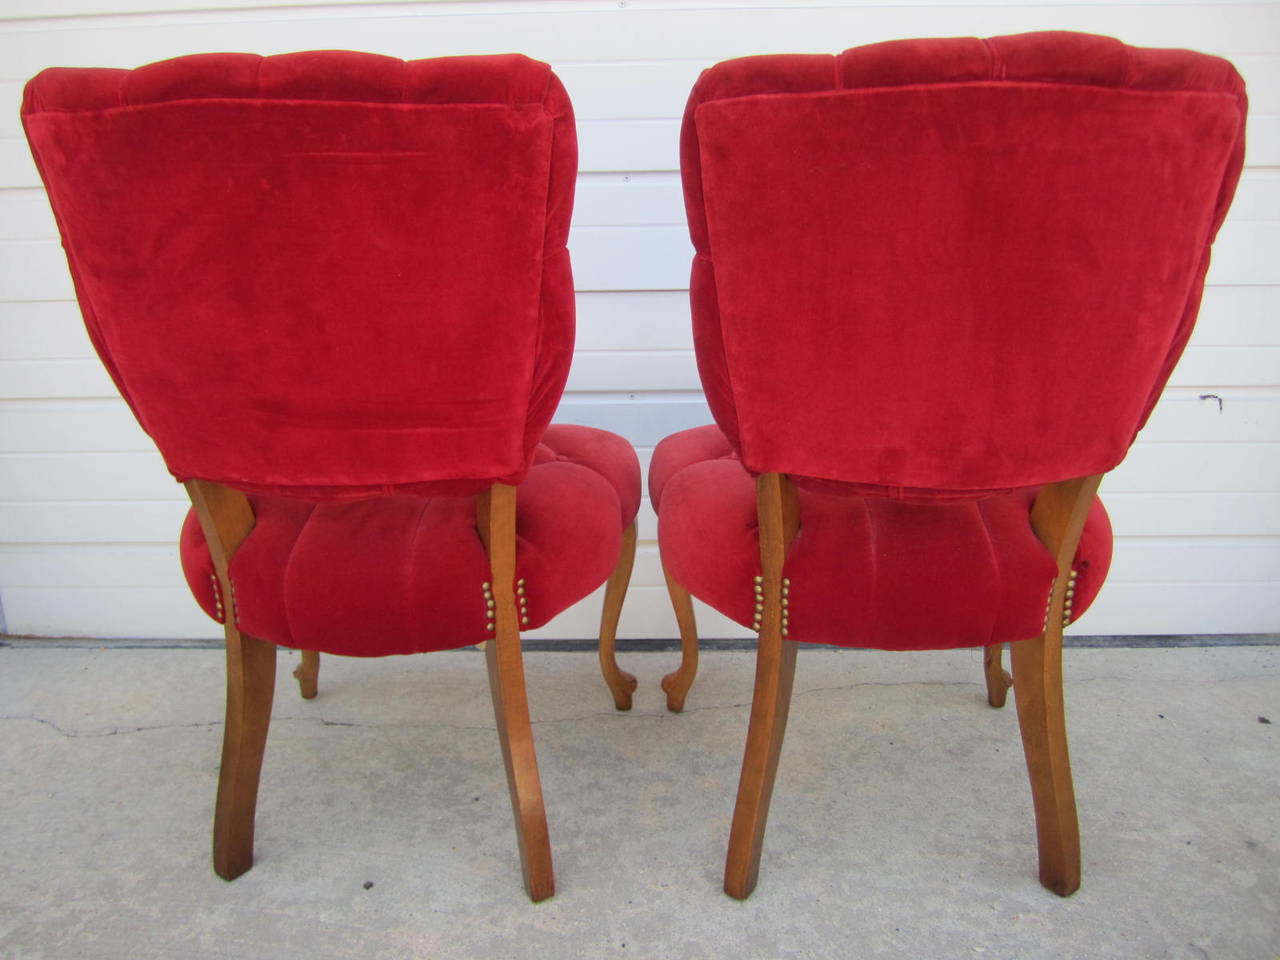 Mid-20th Century Pretty Pair of Queen Anne Style Red Tufted Side Chairs Hollywood Regency For Sale